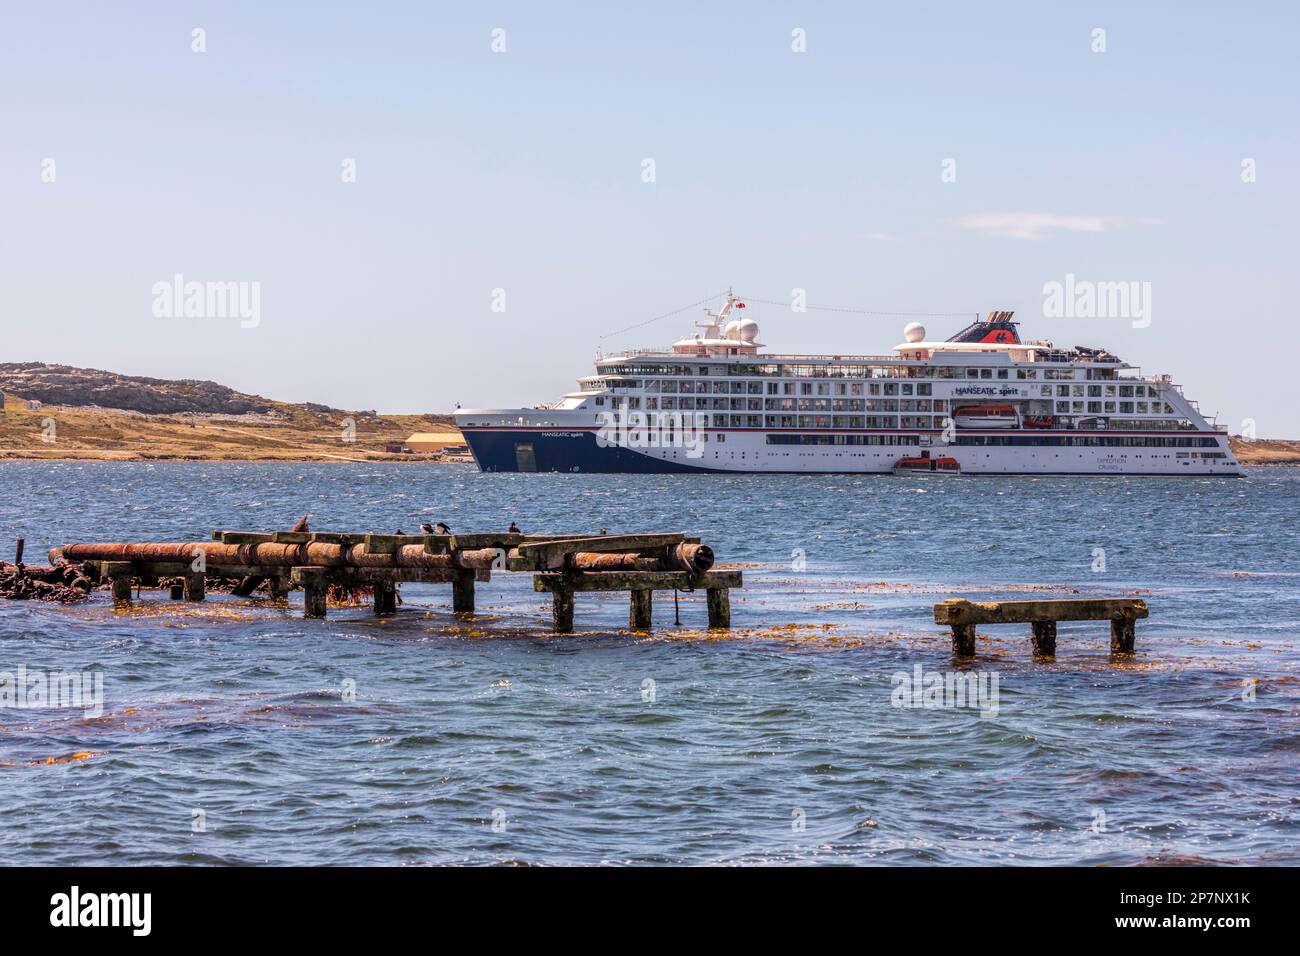 The HANSEATIC SPIRIT, a cruise ship belonging to Hapag Lloyd, anchored in Stanley harbour, Falkland Islands. Stock Photo